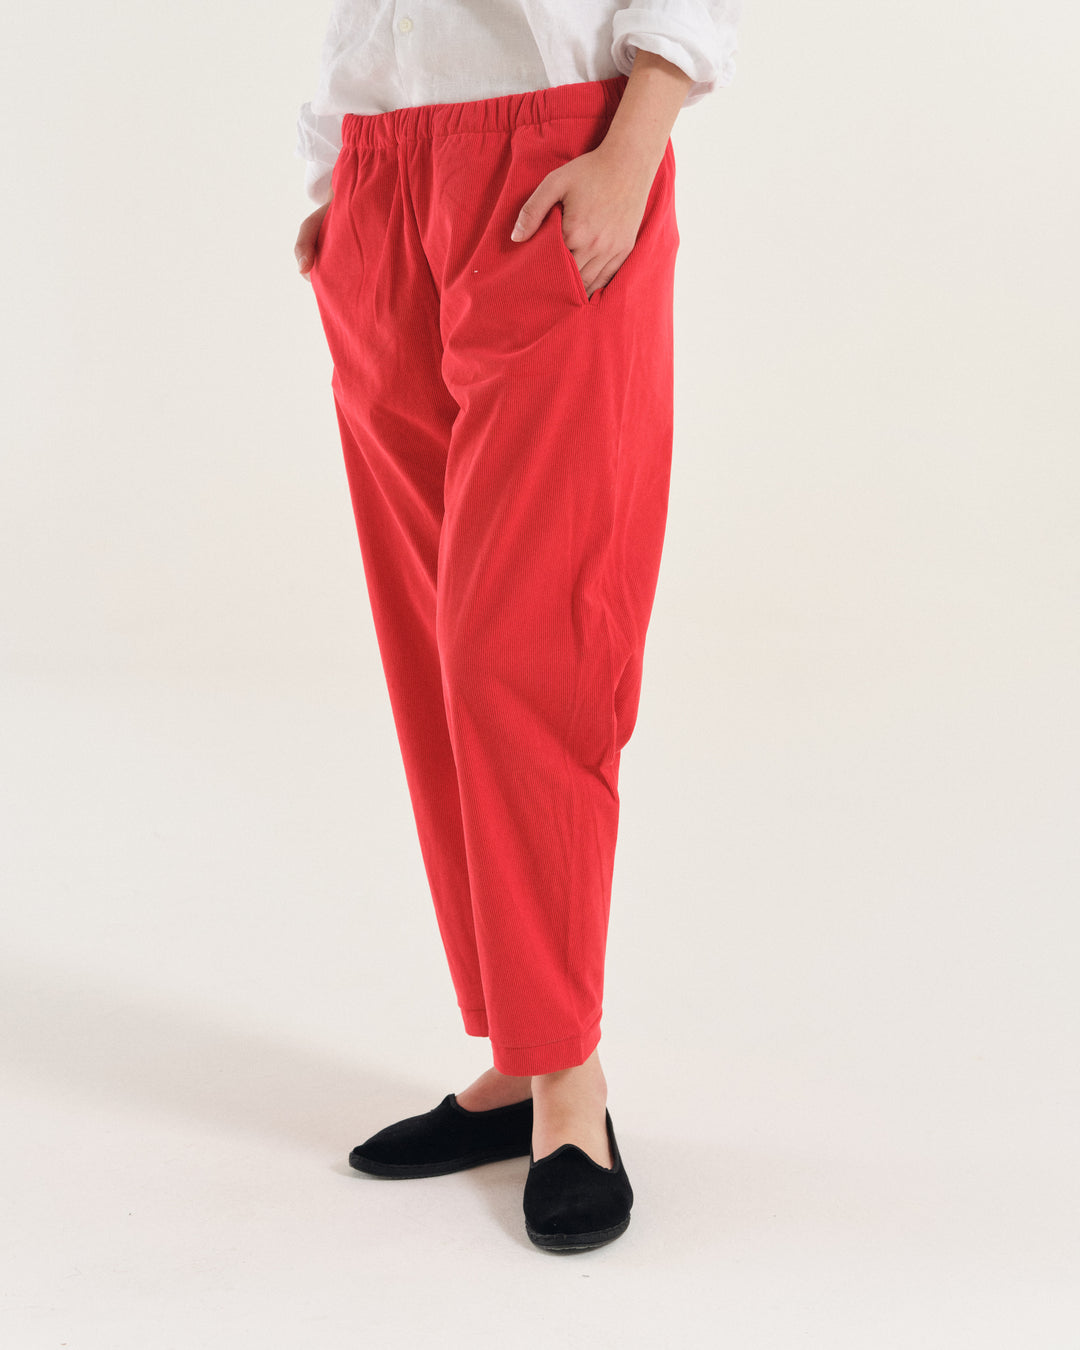 Lupe Pant Red Corduroy